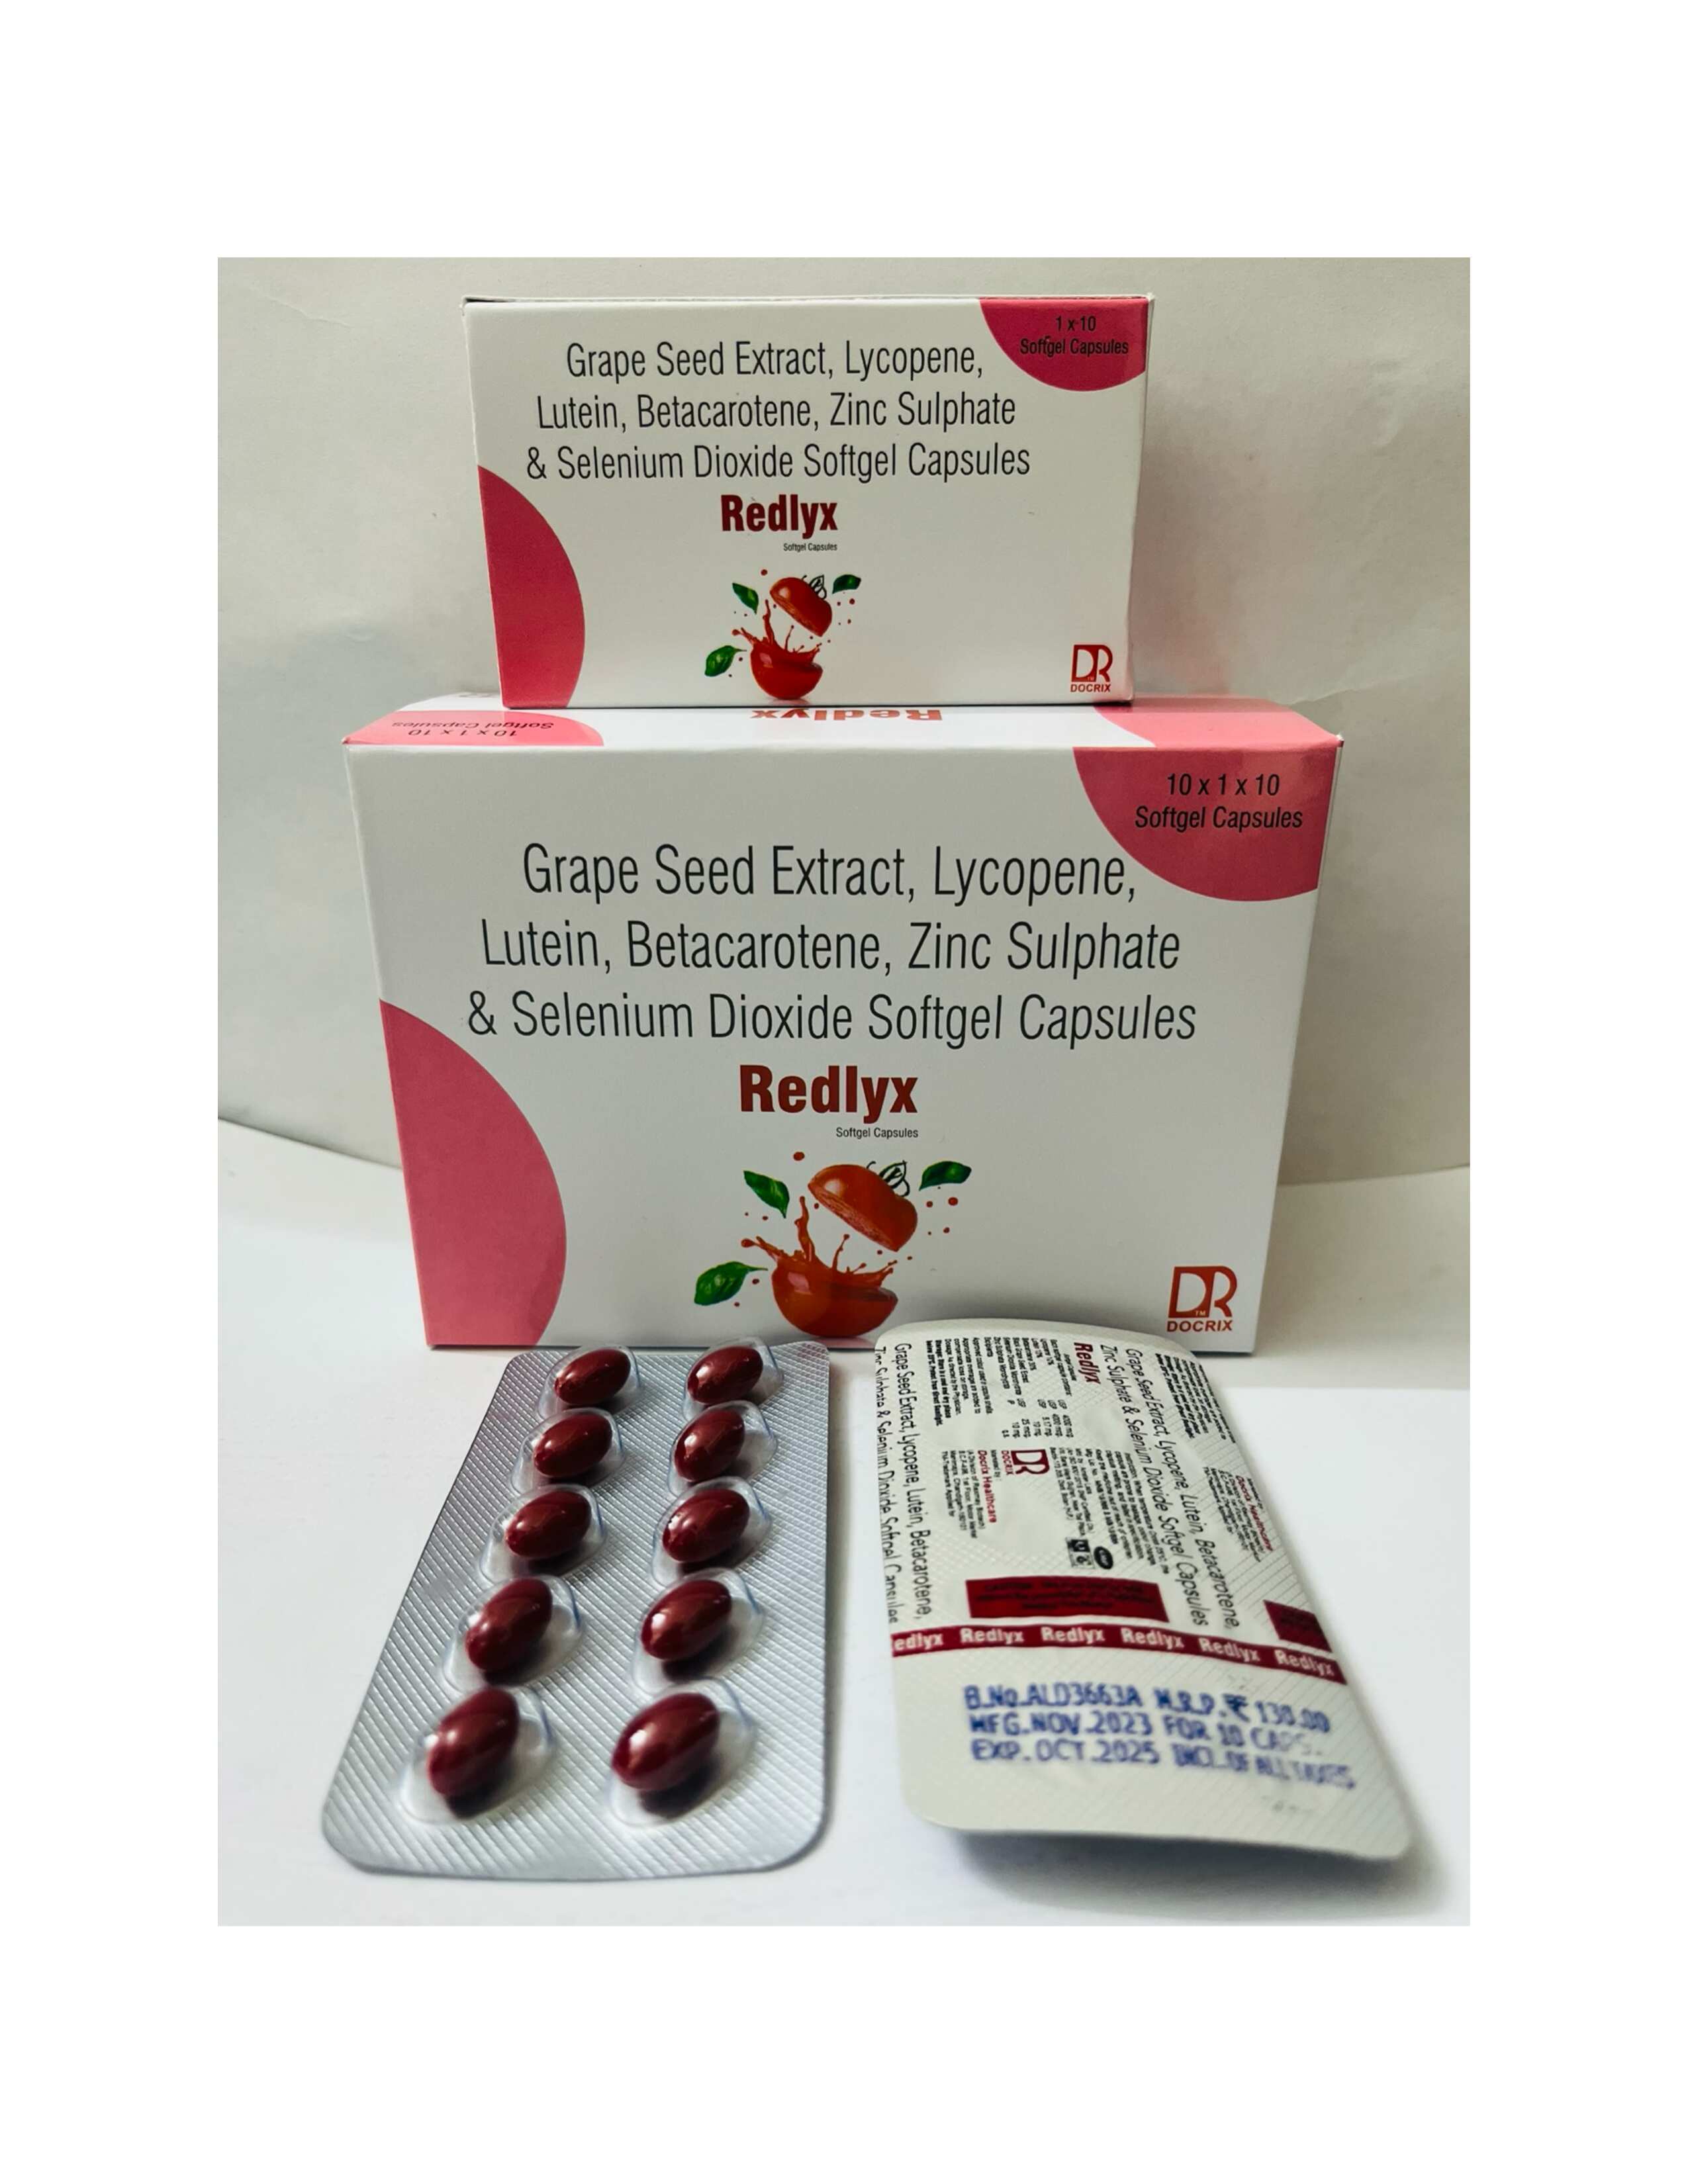 Product Name: Redlyx, Compositions of Redlyx are Grape Seed Extract, Lycopene, Lutein, Betacarotene, Zine Sulphate &Setenium Dioxide Softgel Capsules - Docrix Healthcare